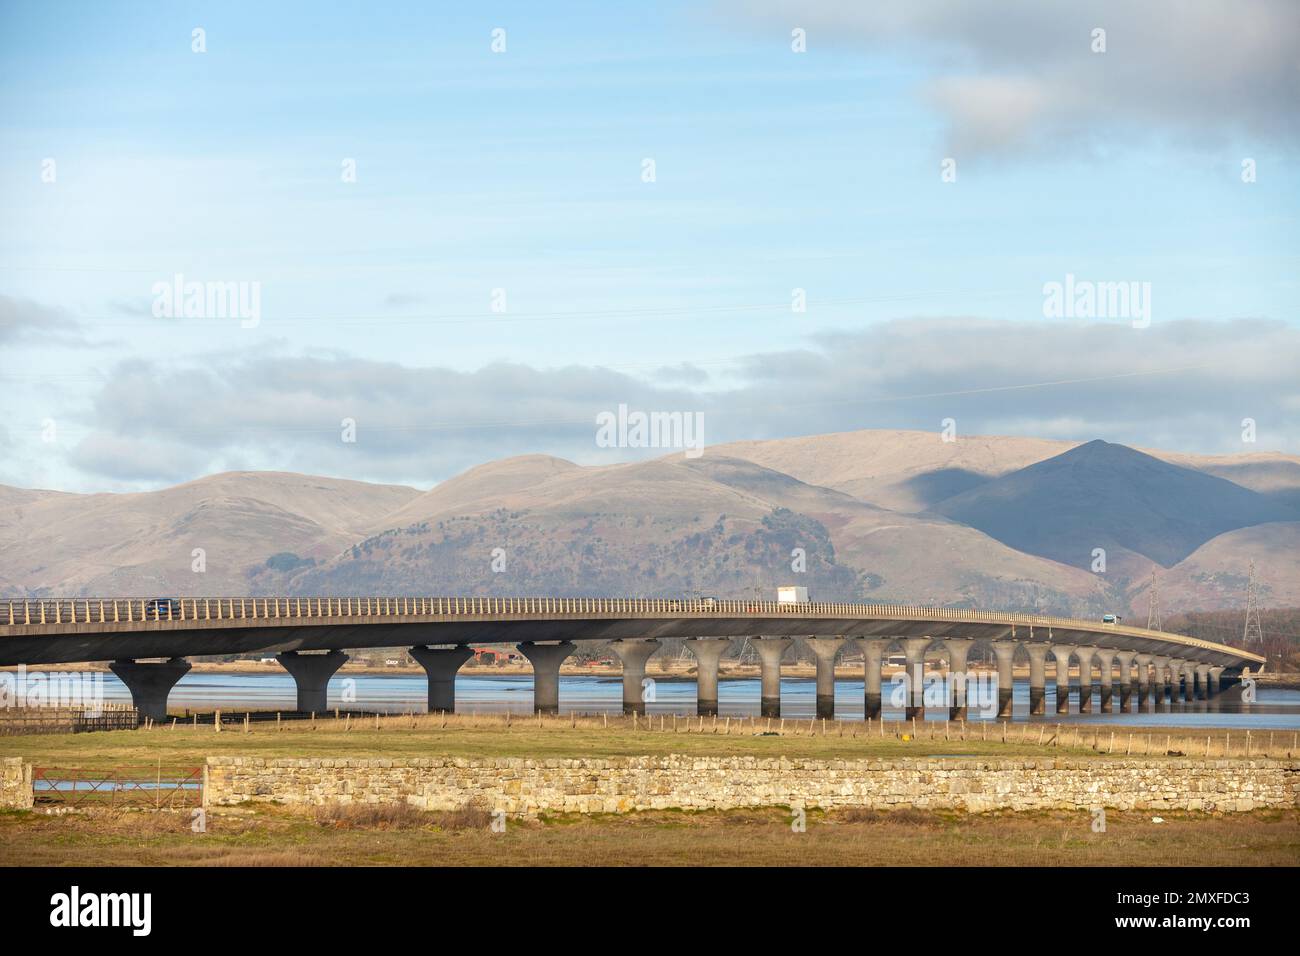 Clackmannanshire Bridge over the Firth of Forth in Scotland which opened to traffic on 19 November 2008 Stock Photo